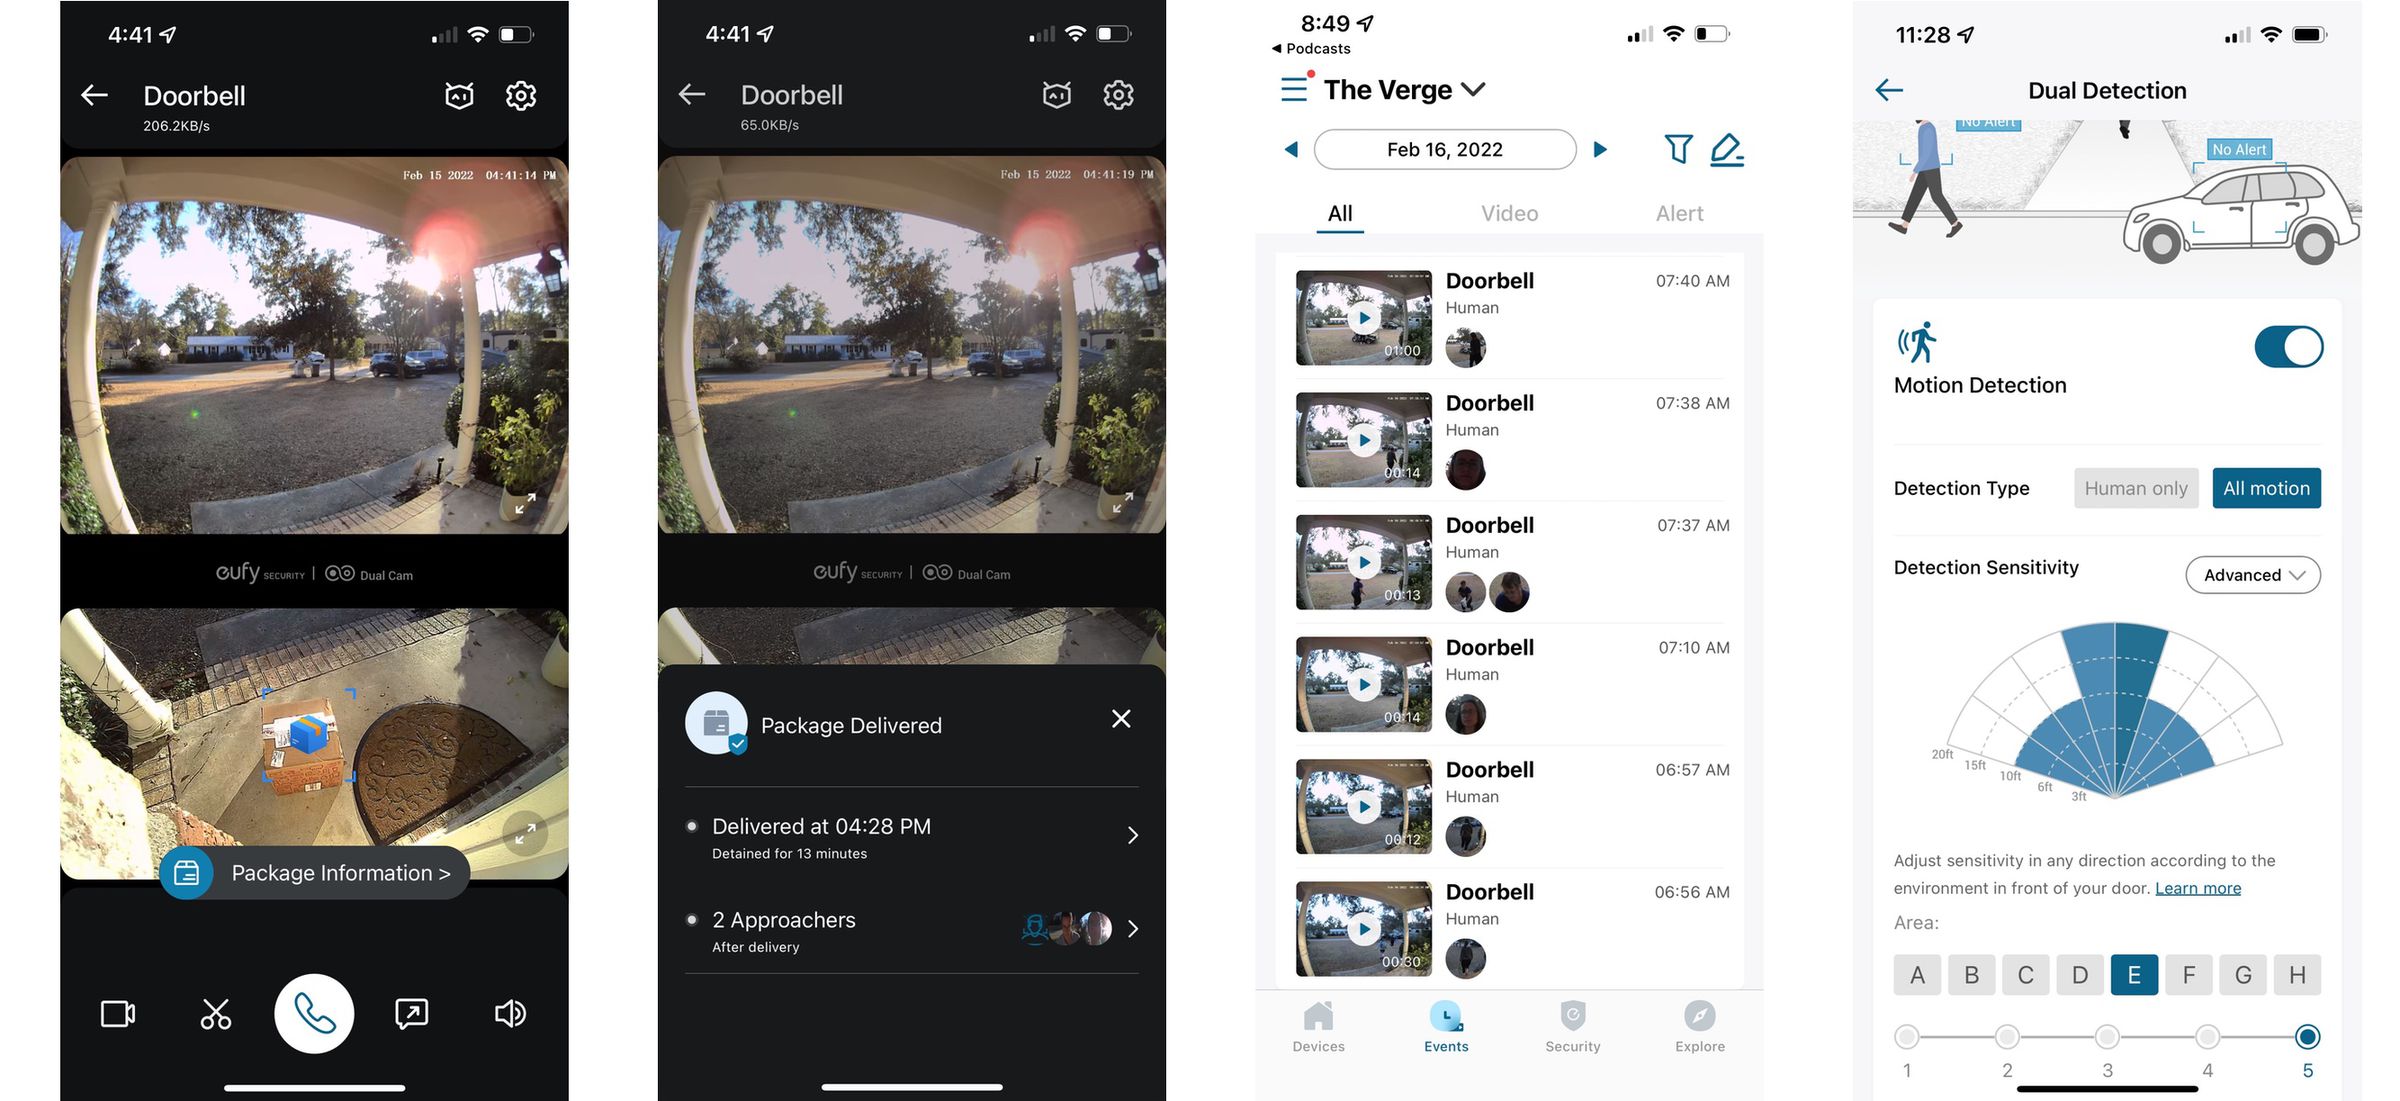 The Eufy doorbell uses AI features to keep watch over packages and shows recent events around the delivery. The Events tab is where you view recorded footage, and there are lots of settings to tinker with to get optimal detection.